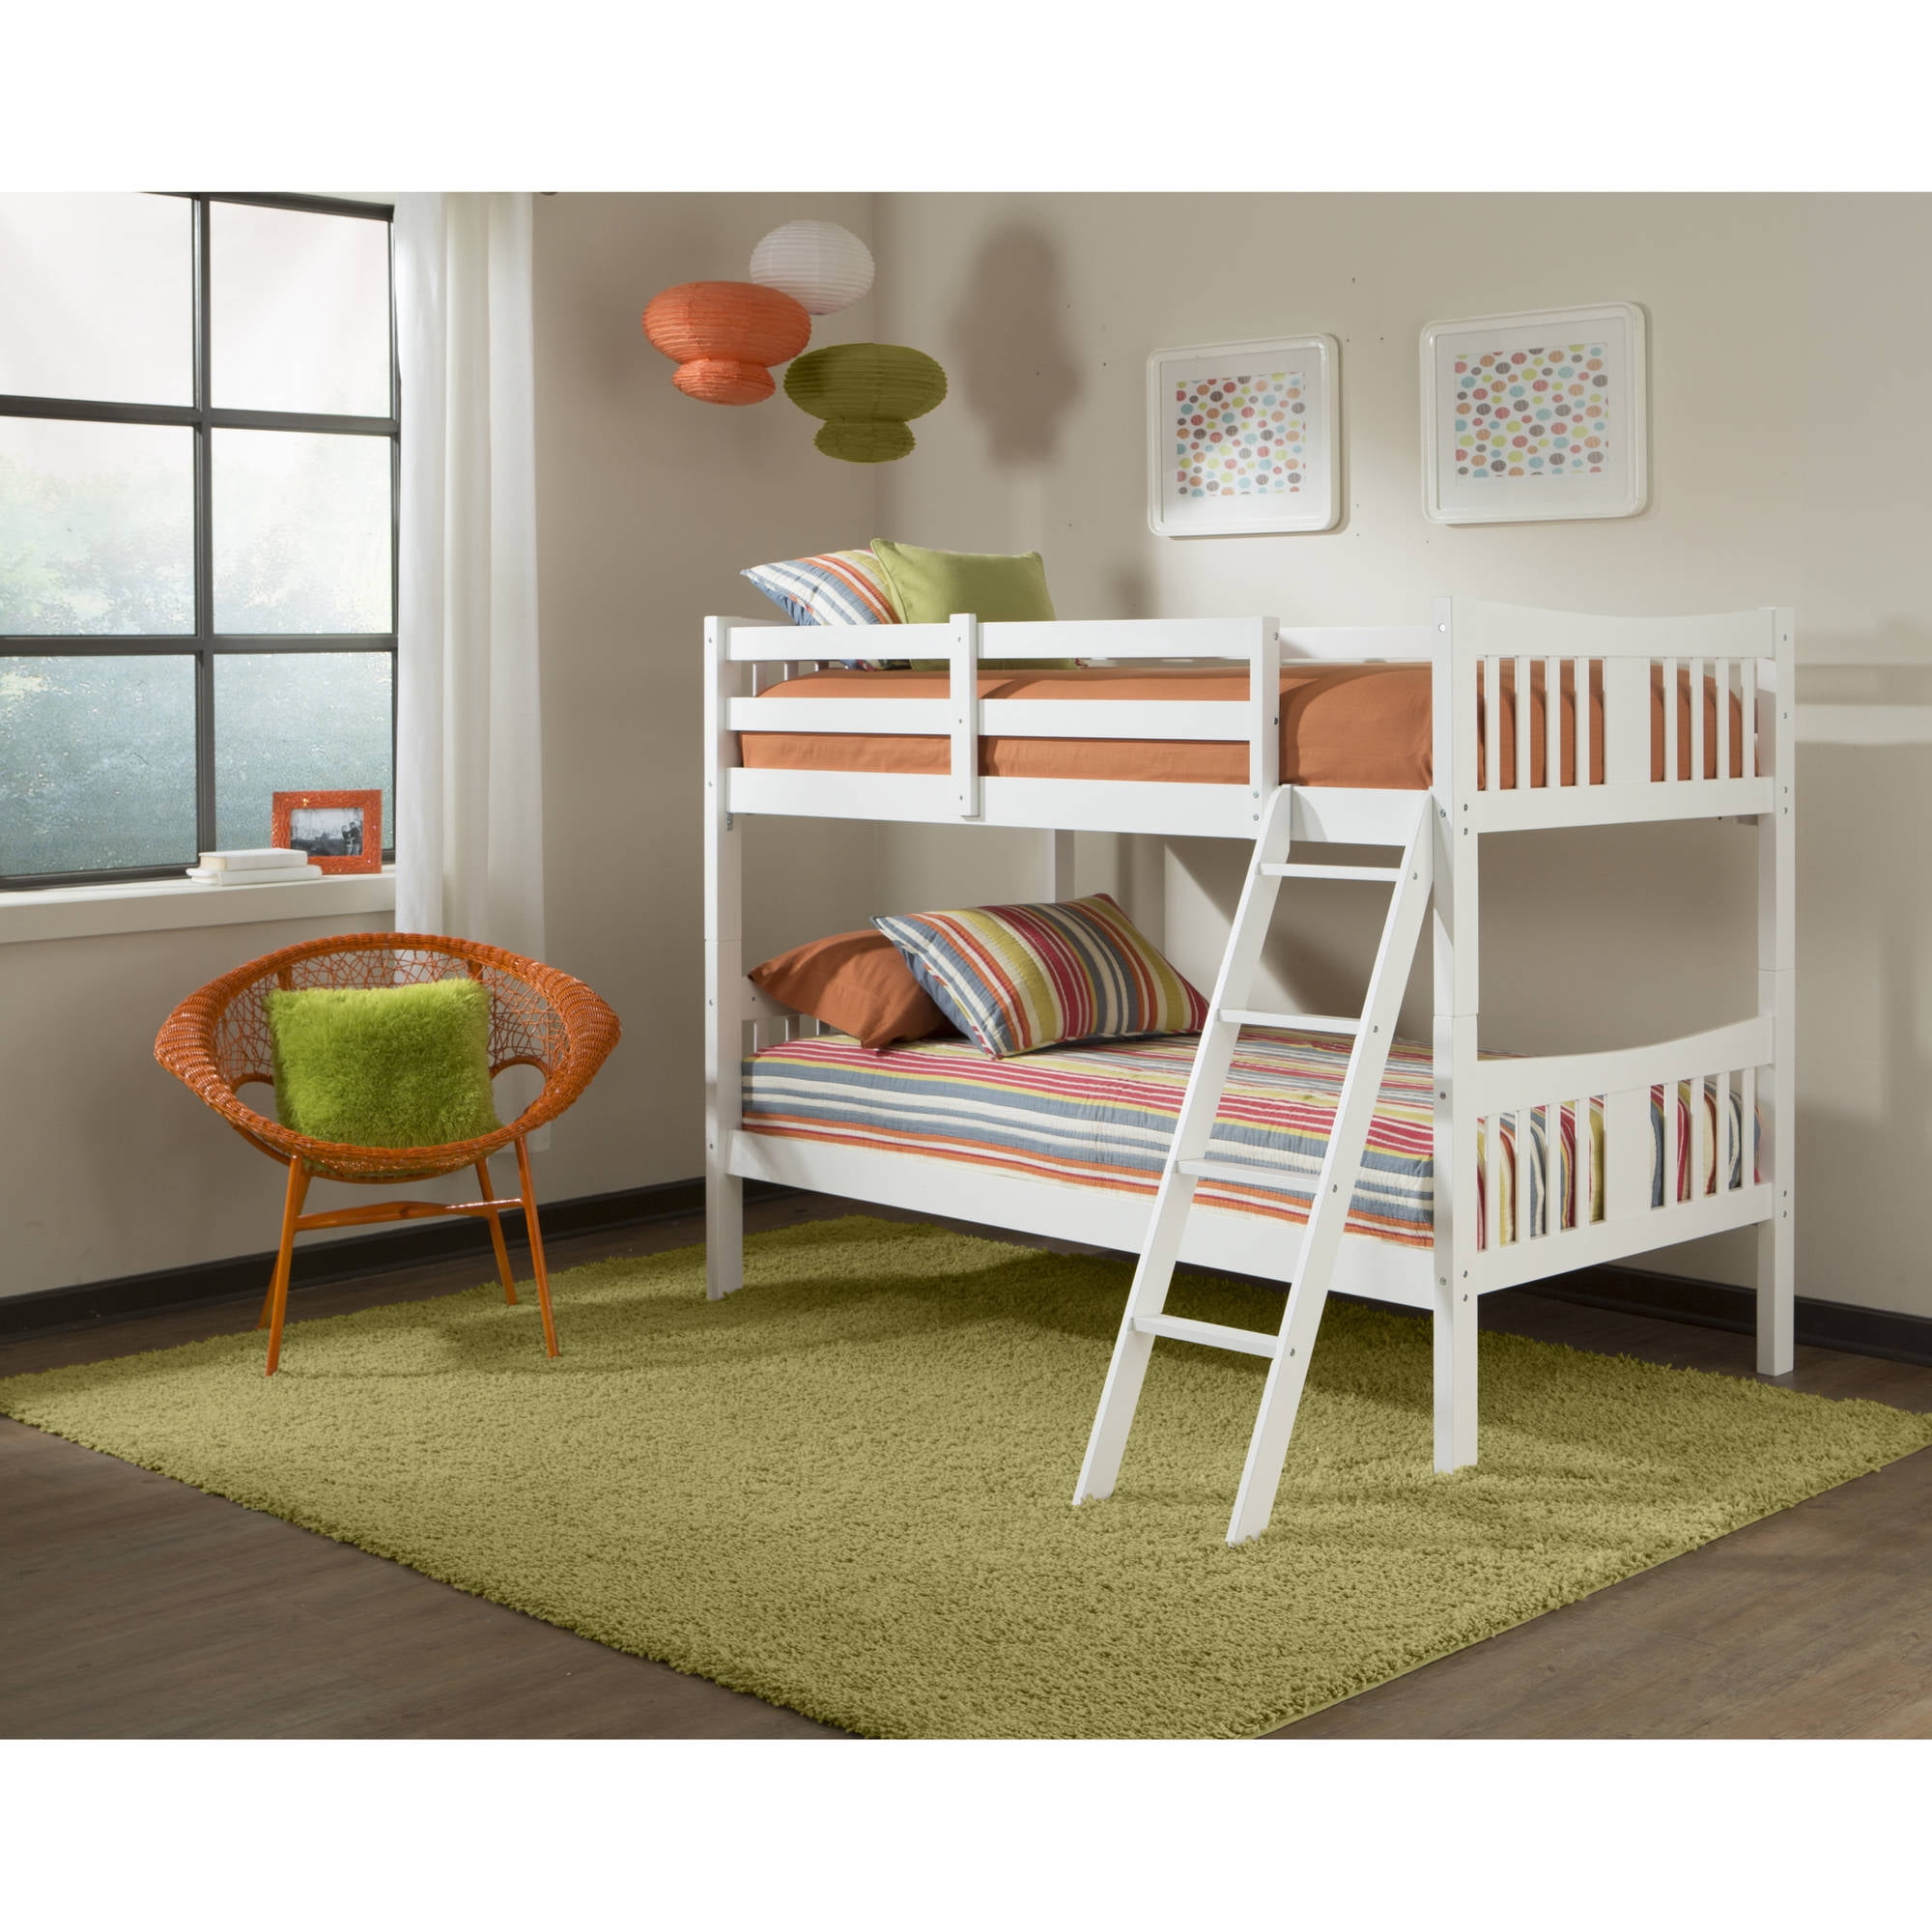 Storkcraft Caribou Twin Over Solid, Storkcraft Caribou Bunk Bed Instructions